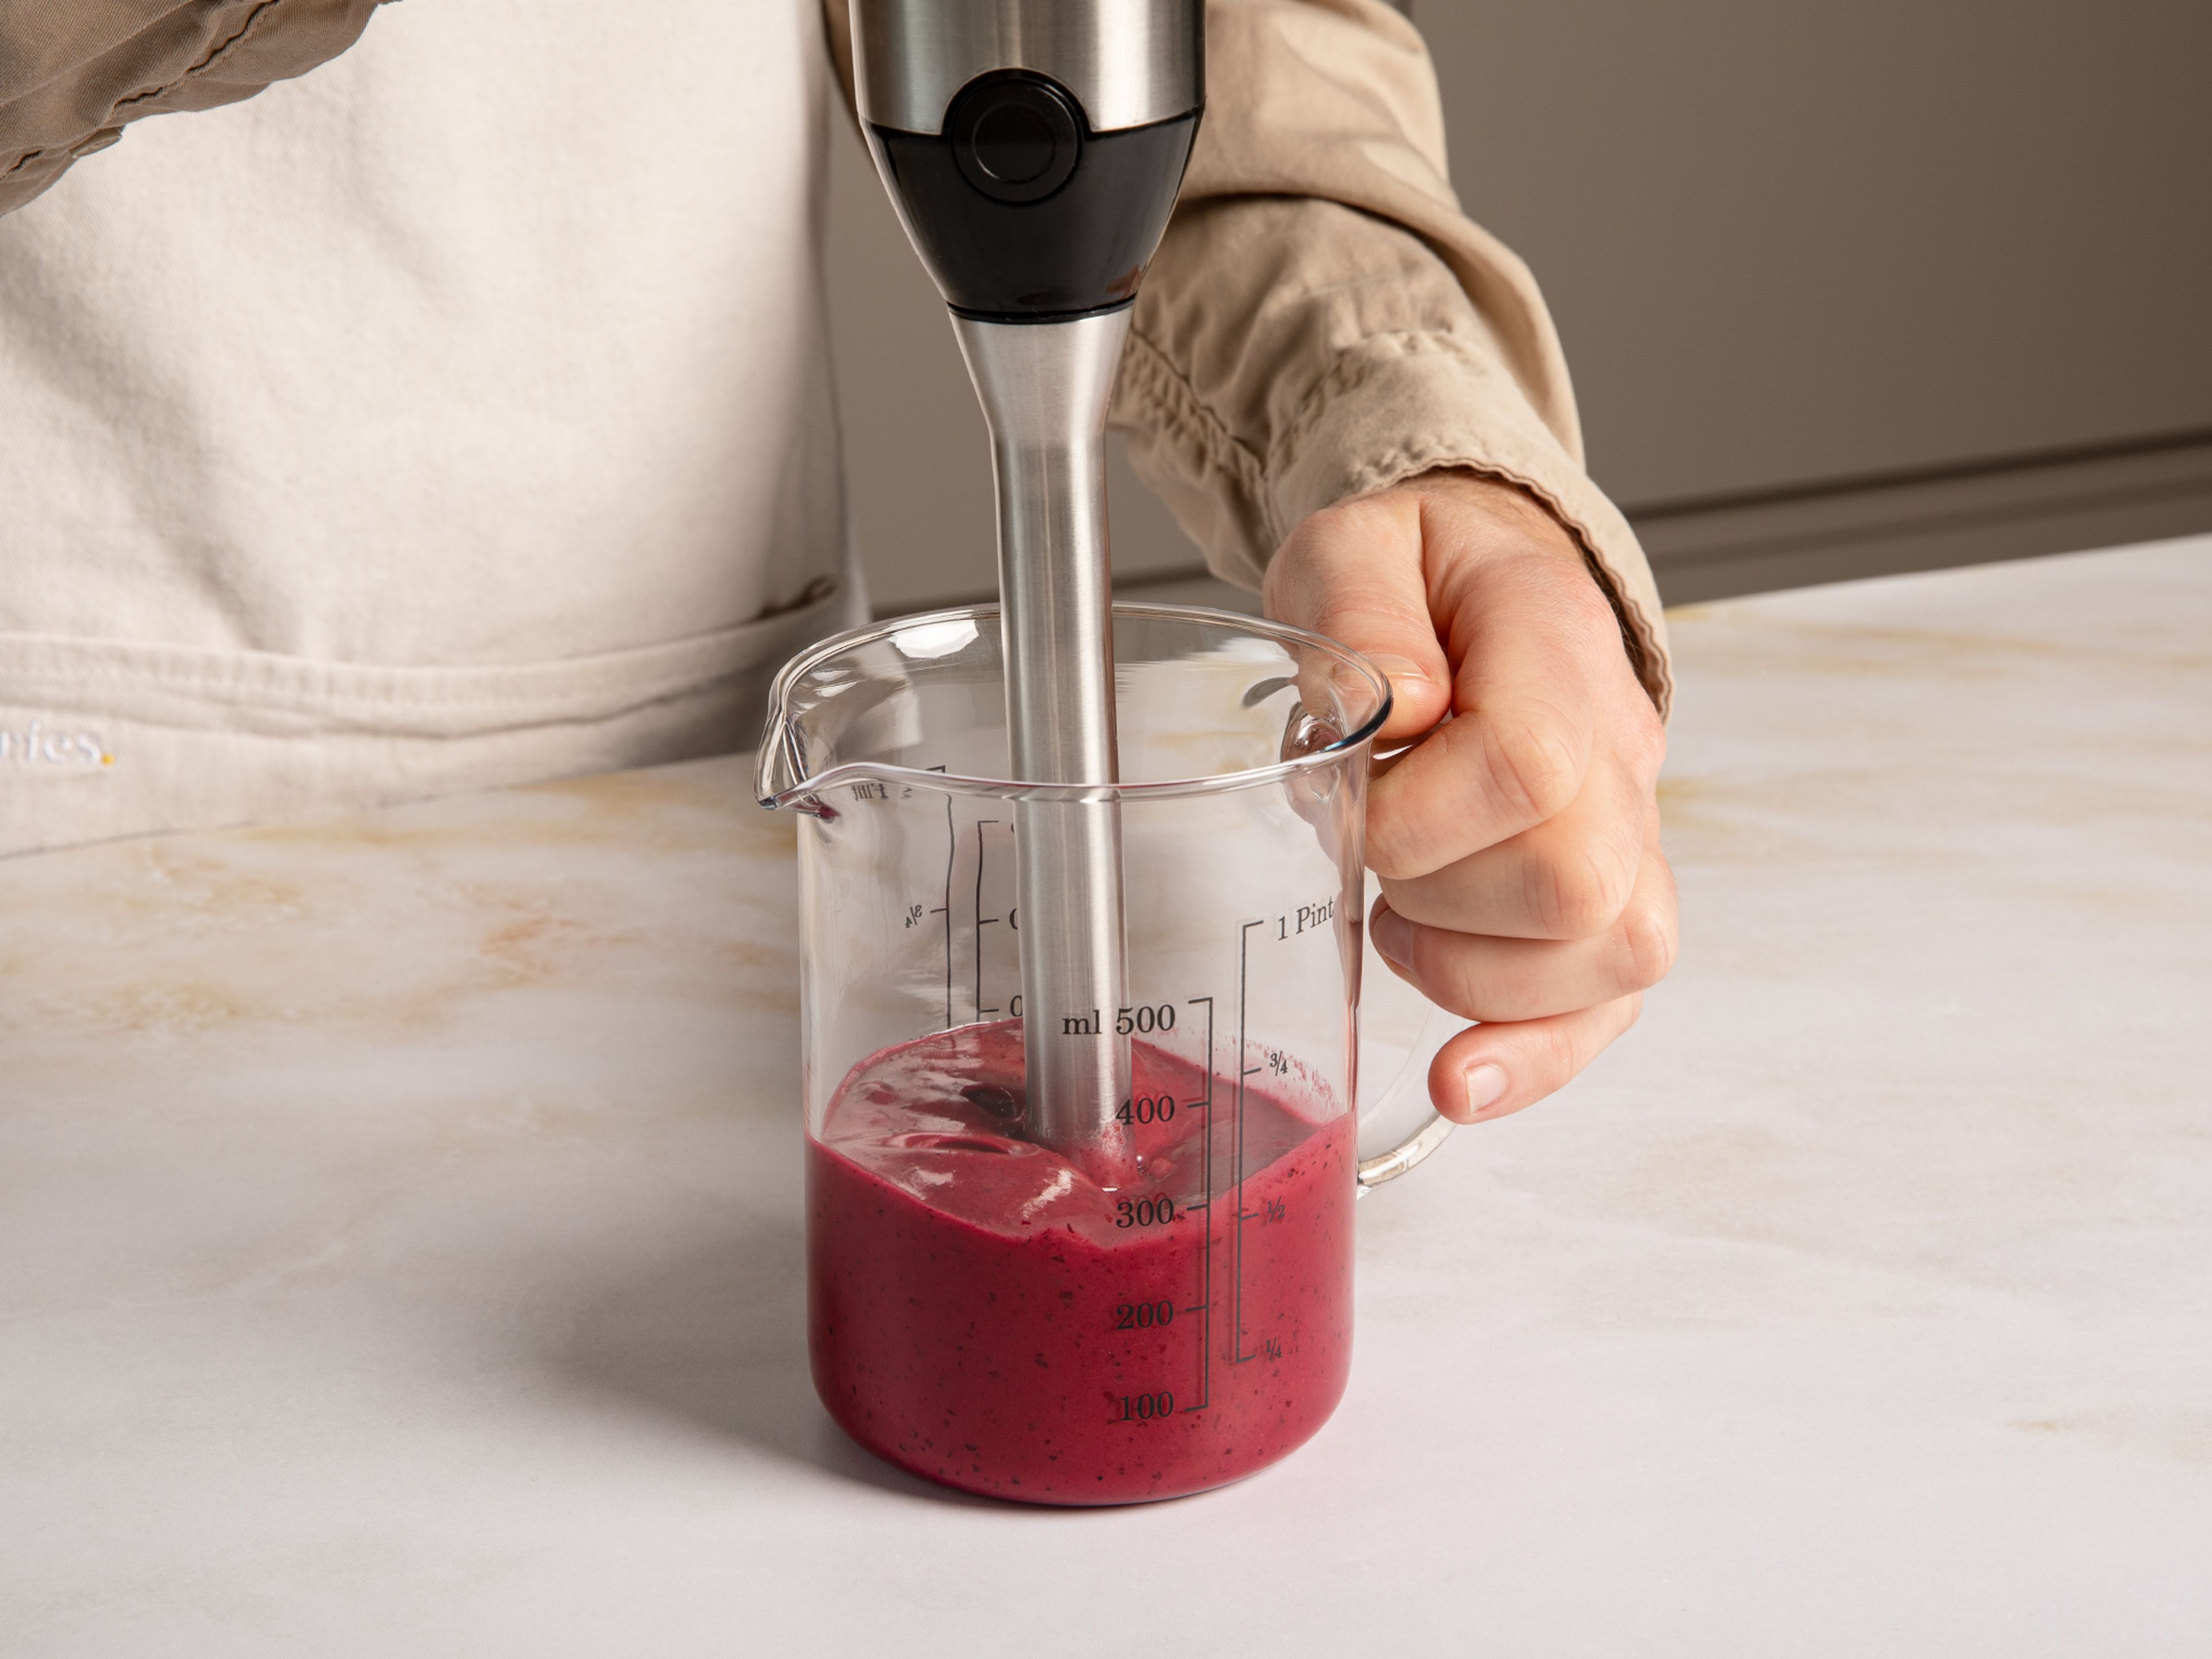 Clean and spin dry the lettuce. For the dressing, in a measuring cup with an immersion blender, purée half of the blueberries with orange juice and zest, mustard, salt, and pepper. Then slowly mix in the oil to make a creamy dressing.